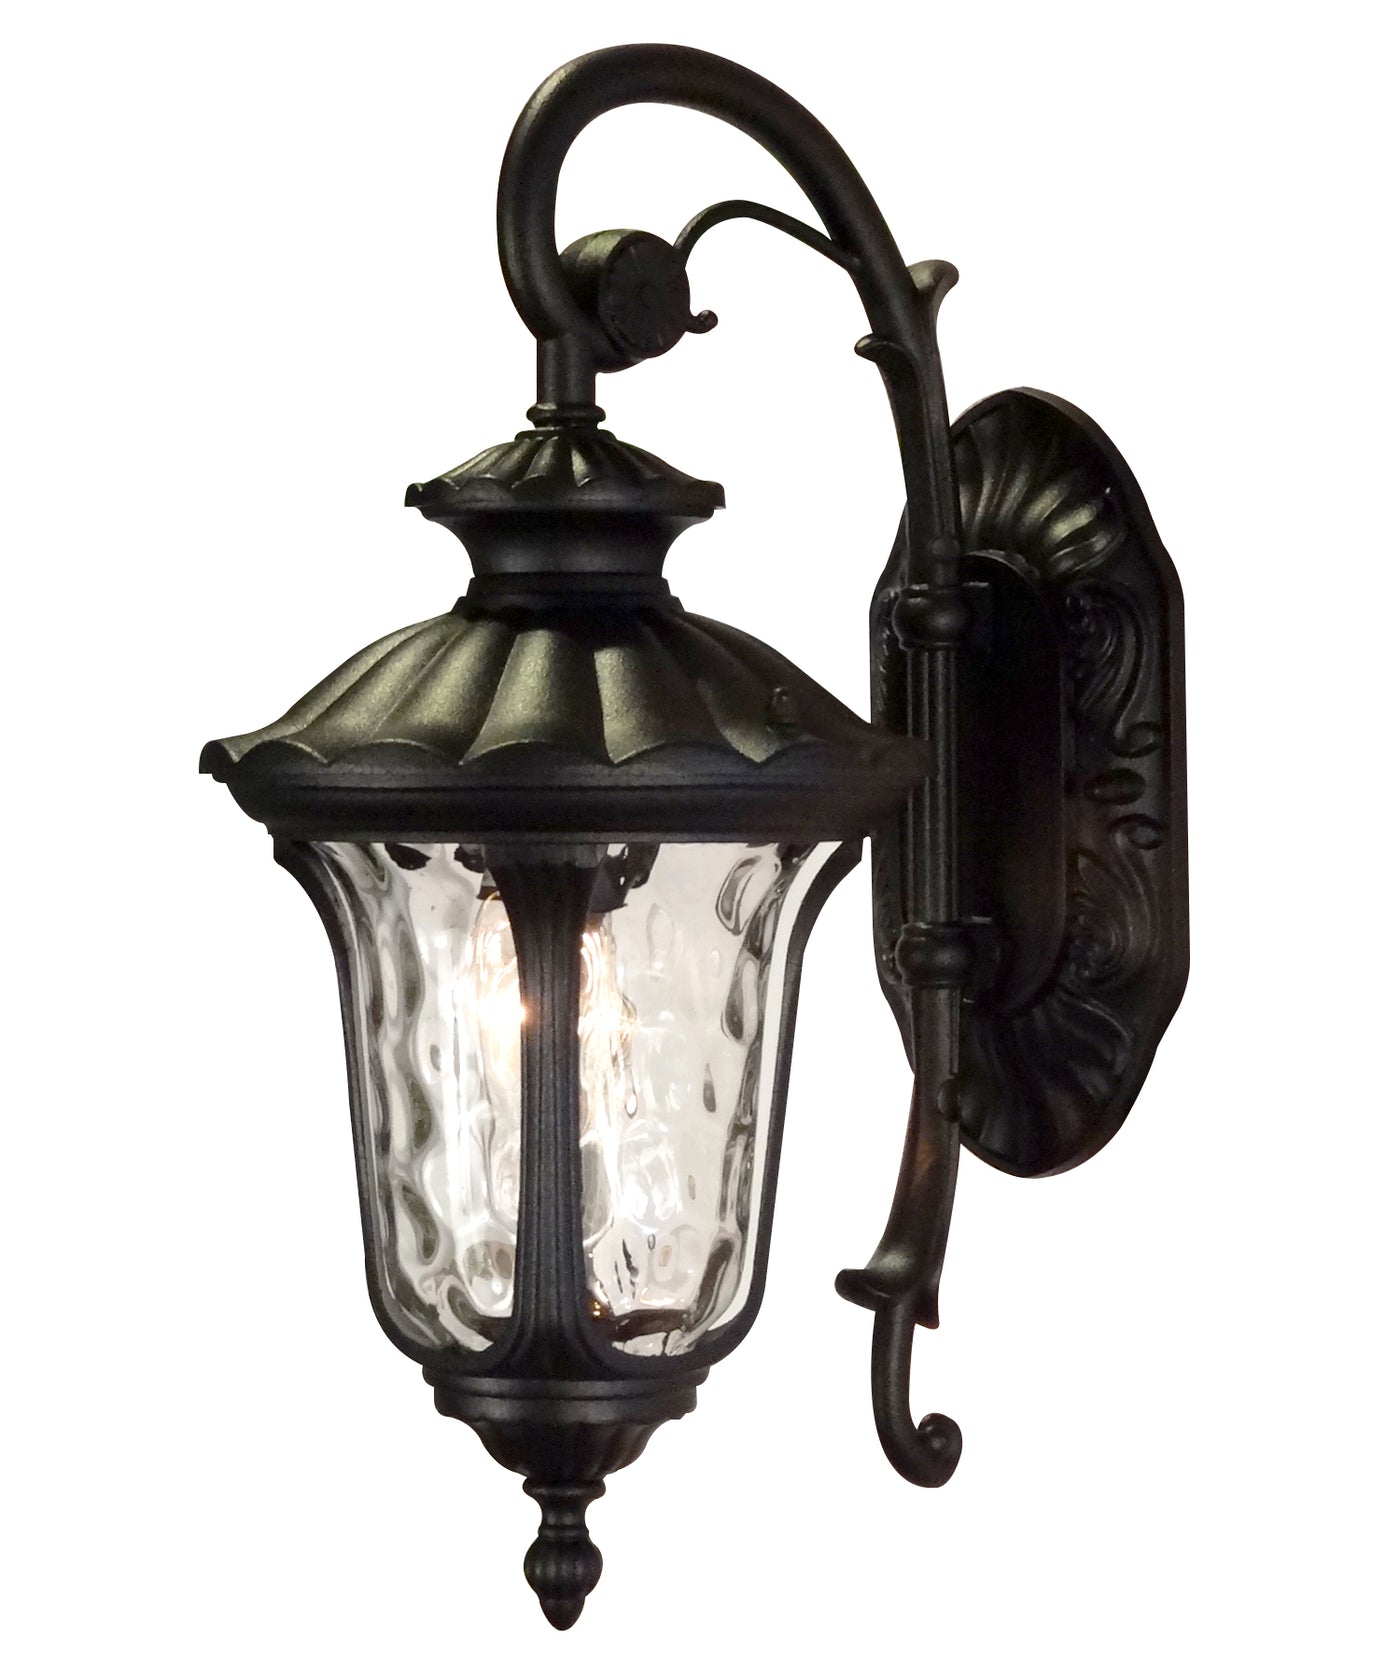 Chateau F-1781-BLK Small Top Mount Exterior Wall Light Fixture